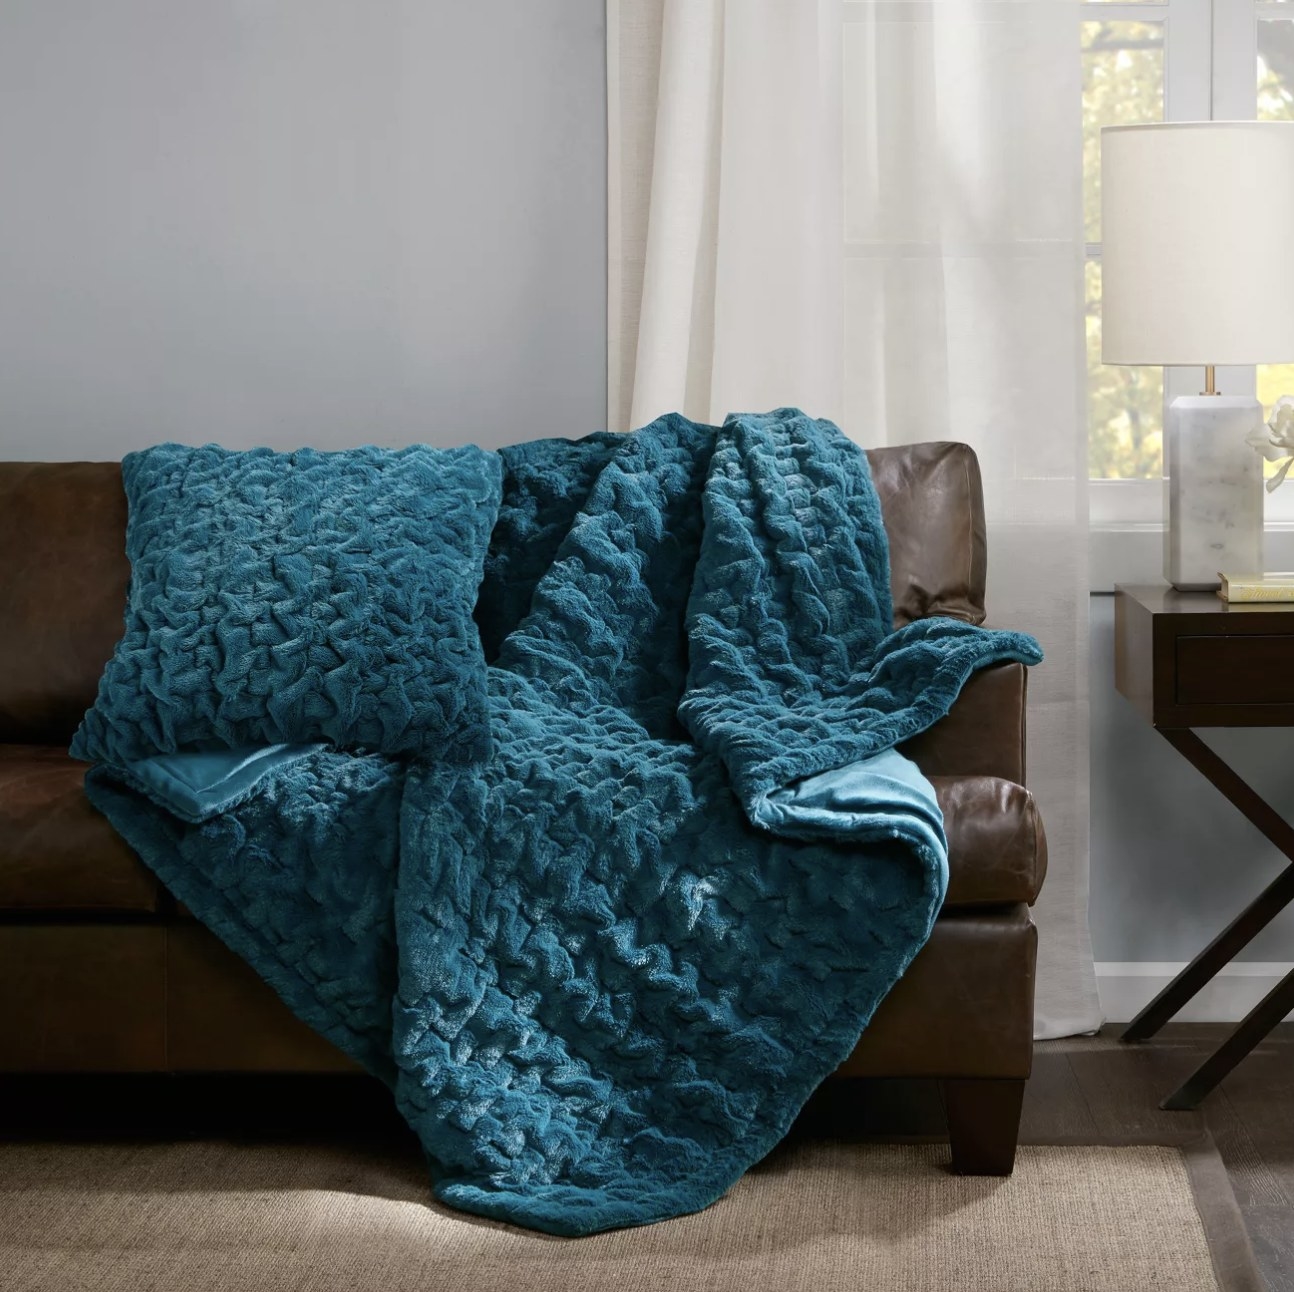 The teal blanket draped on a couch